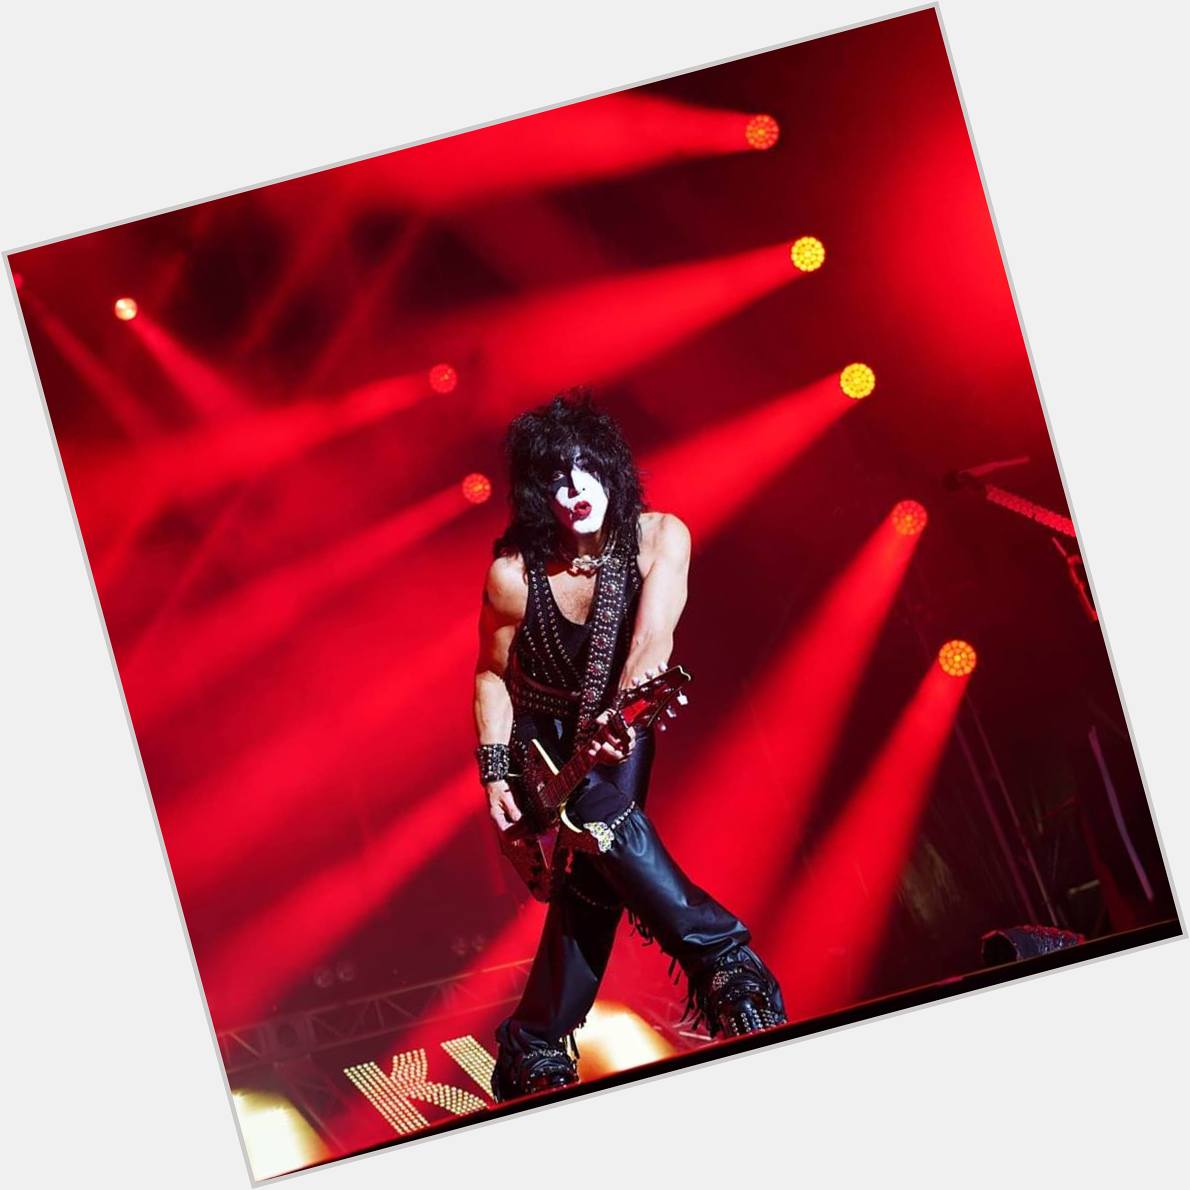 Happy birthday Paul Stanley Don t miss KISS End of the Road Tour on August 21 -> 